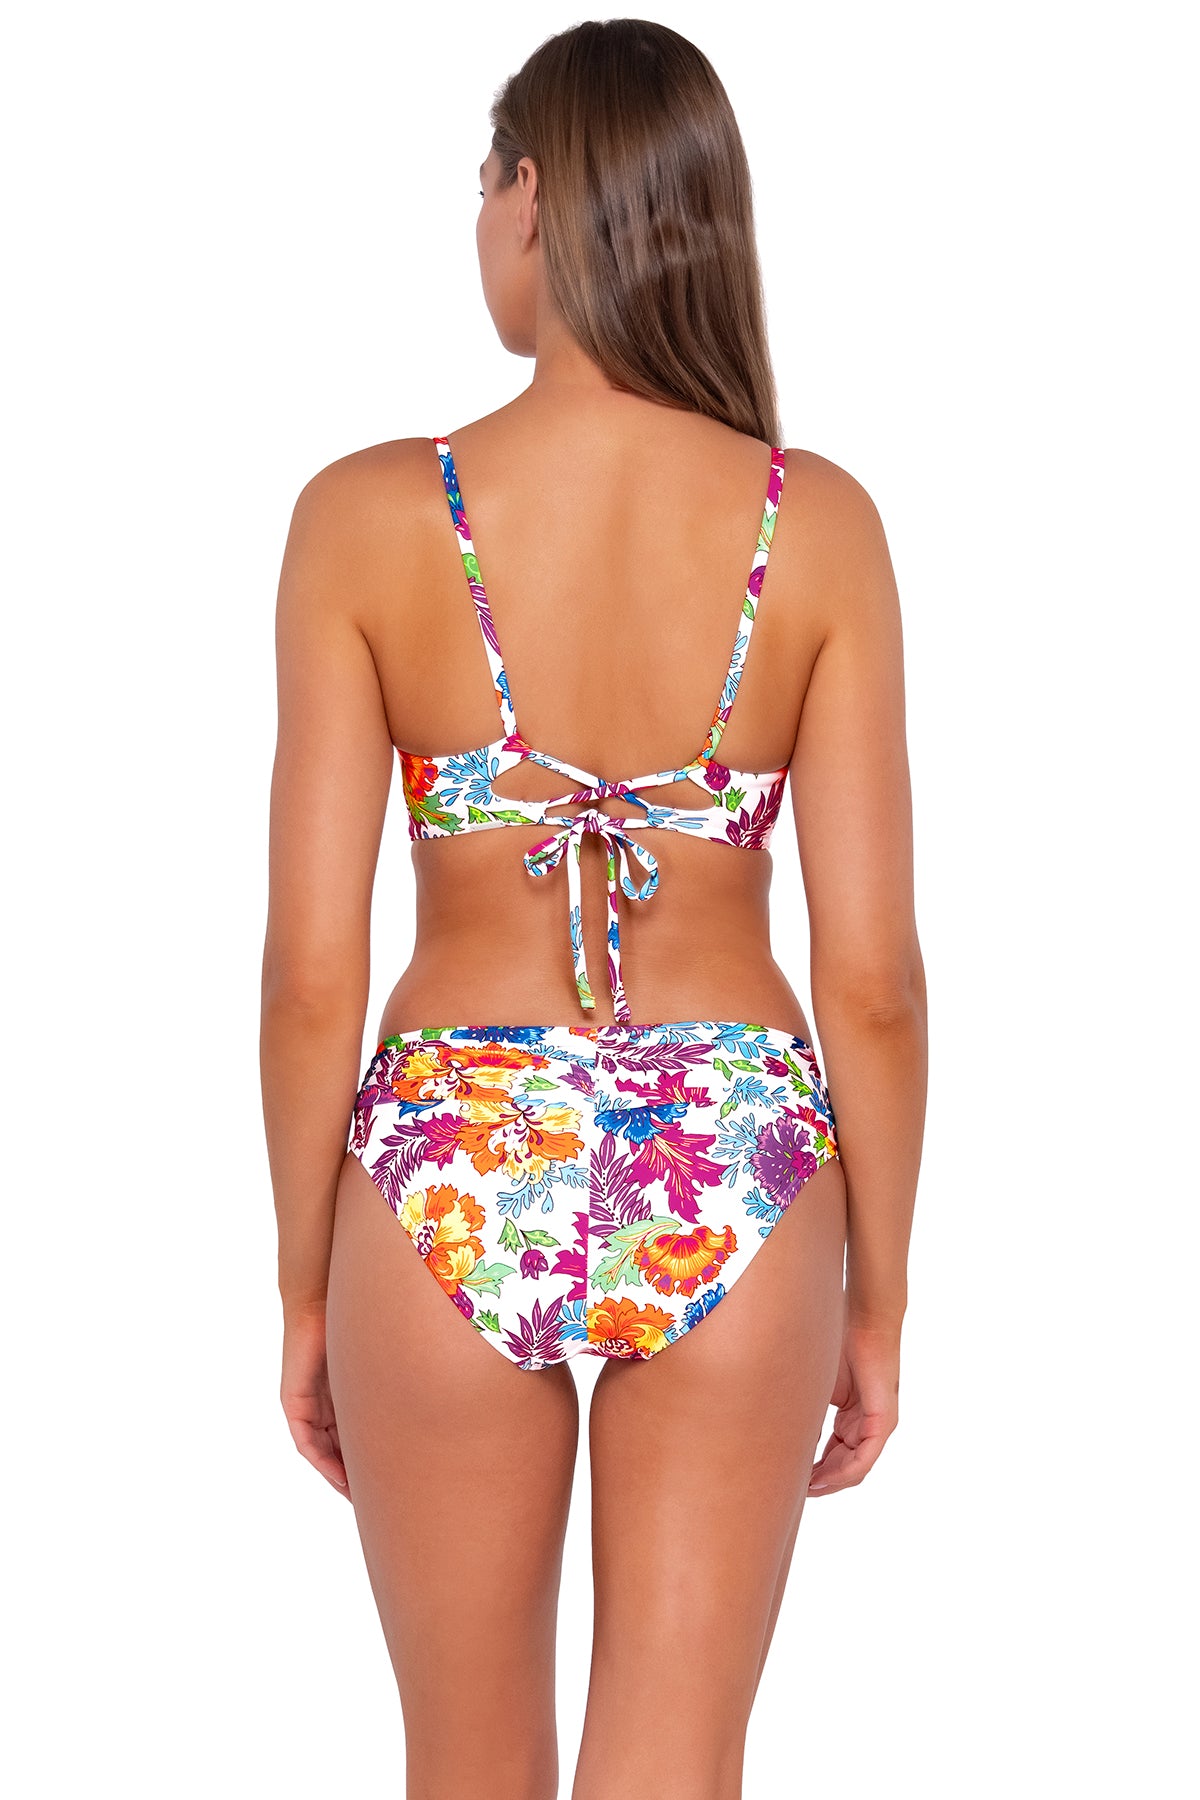 Back pose #1 of Daria wearing Sunsets Camilla Flora Lyla Bralette with matching Unforgettable Bottom swim hipster